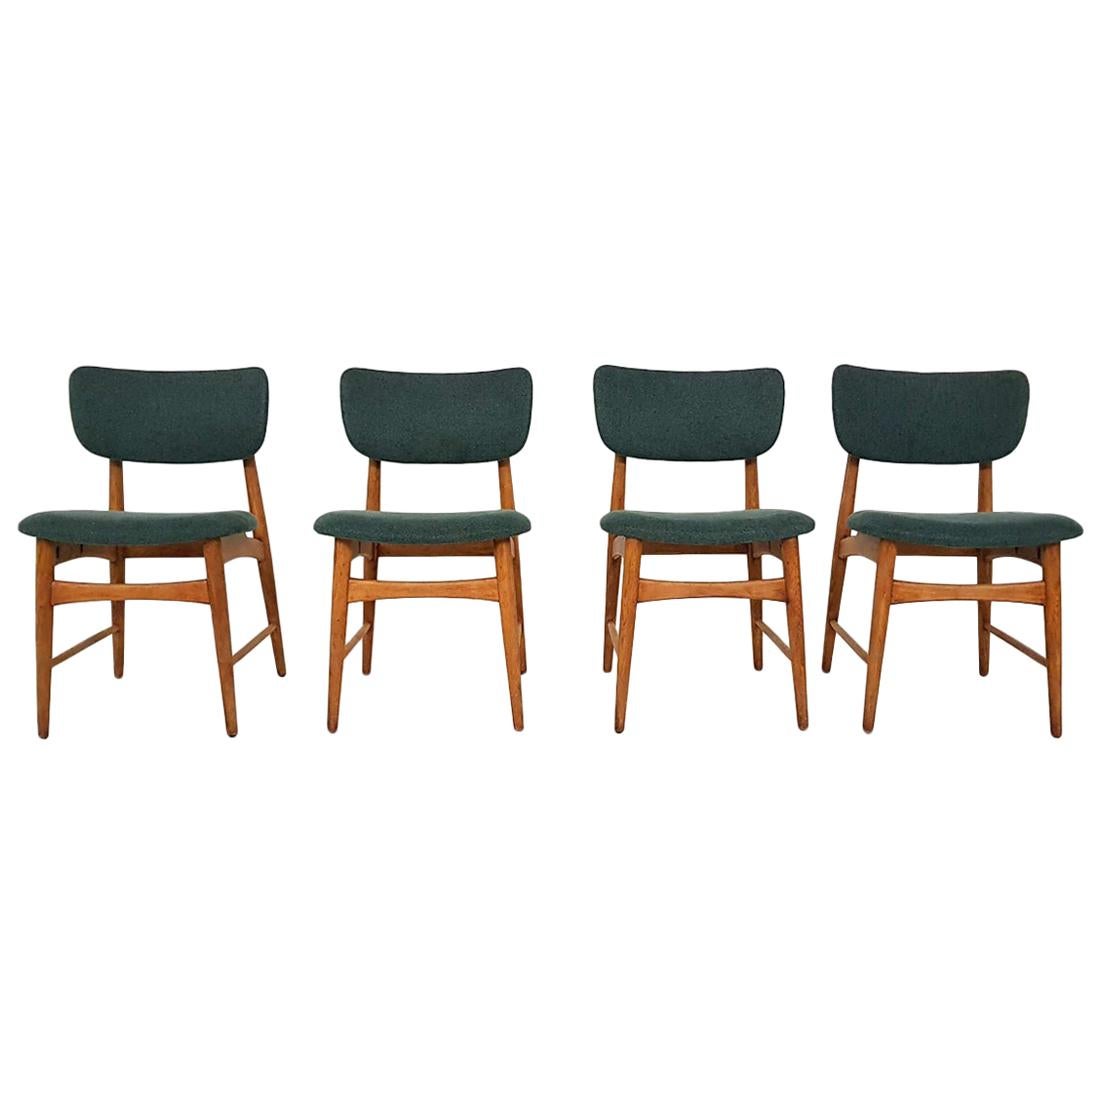 Set of 4 Oak Dining Room Chairs Attributed to Bovenkamp, The Netherlands, 1960s For Sale